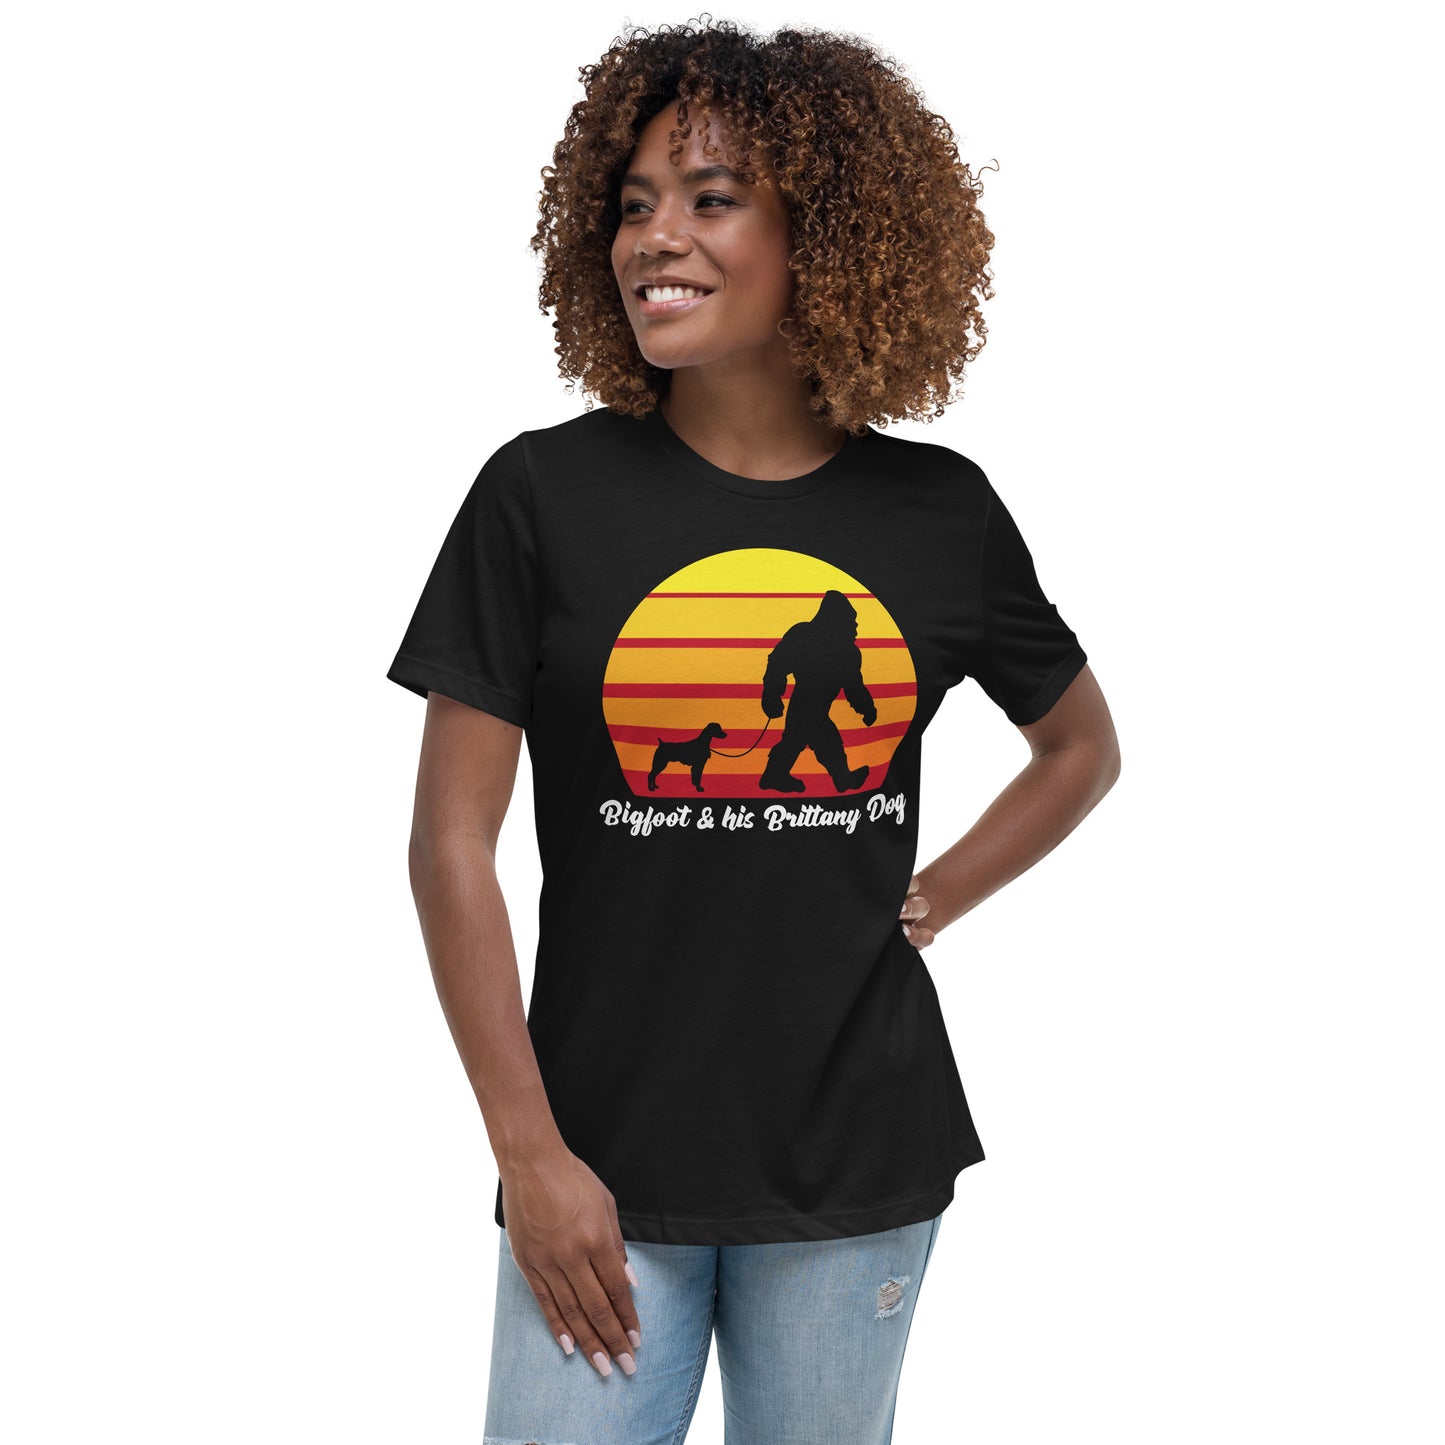 Big foot and his Brittany dog women’s black t-shirt by Dog Artistry.